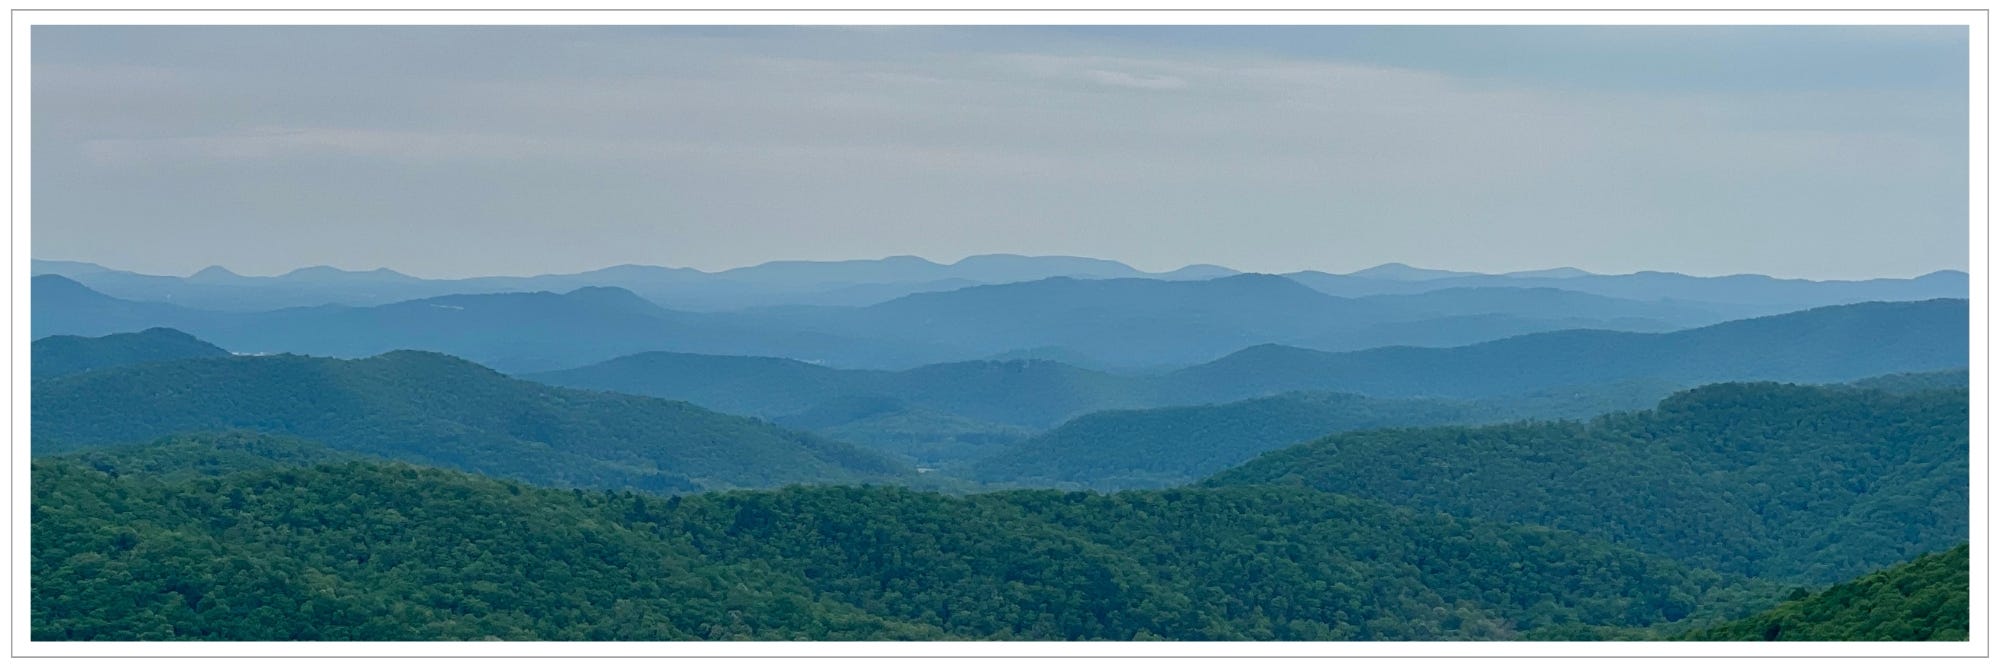 soft mists of clouds softening the ridges of layers of greening mountain ranges; mountain ridges blue in the distance fading into sky